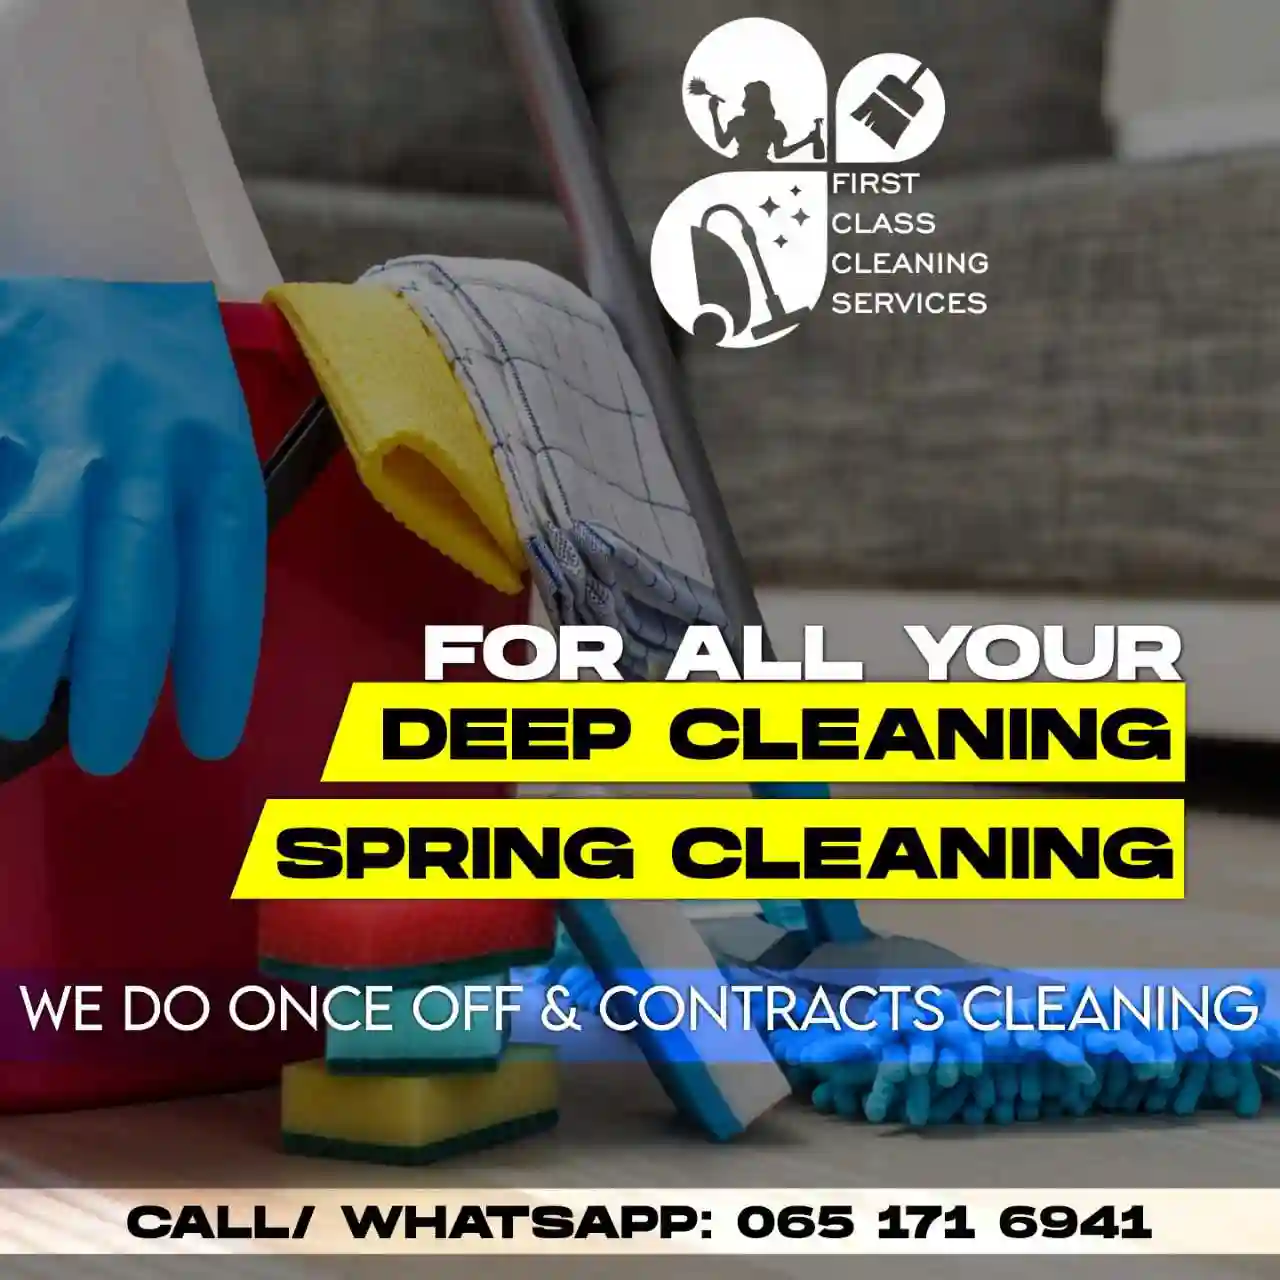 FIRST CLASS CLEANING SERVICE